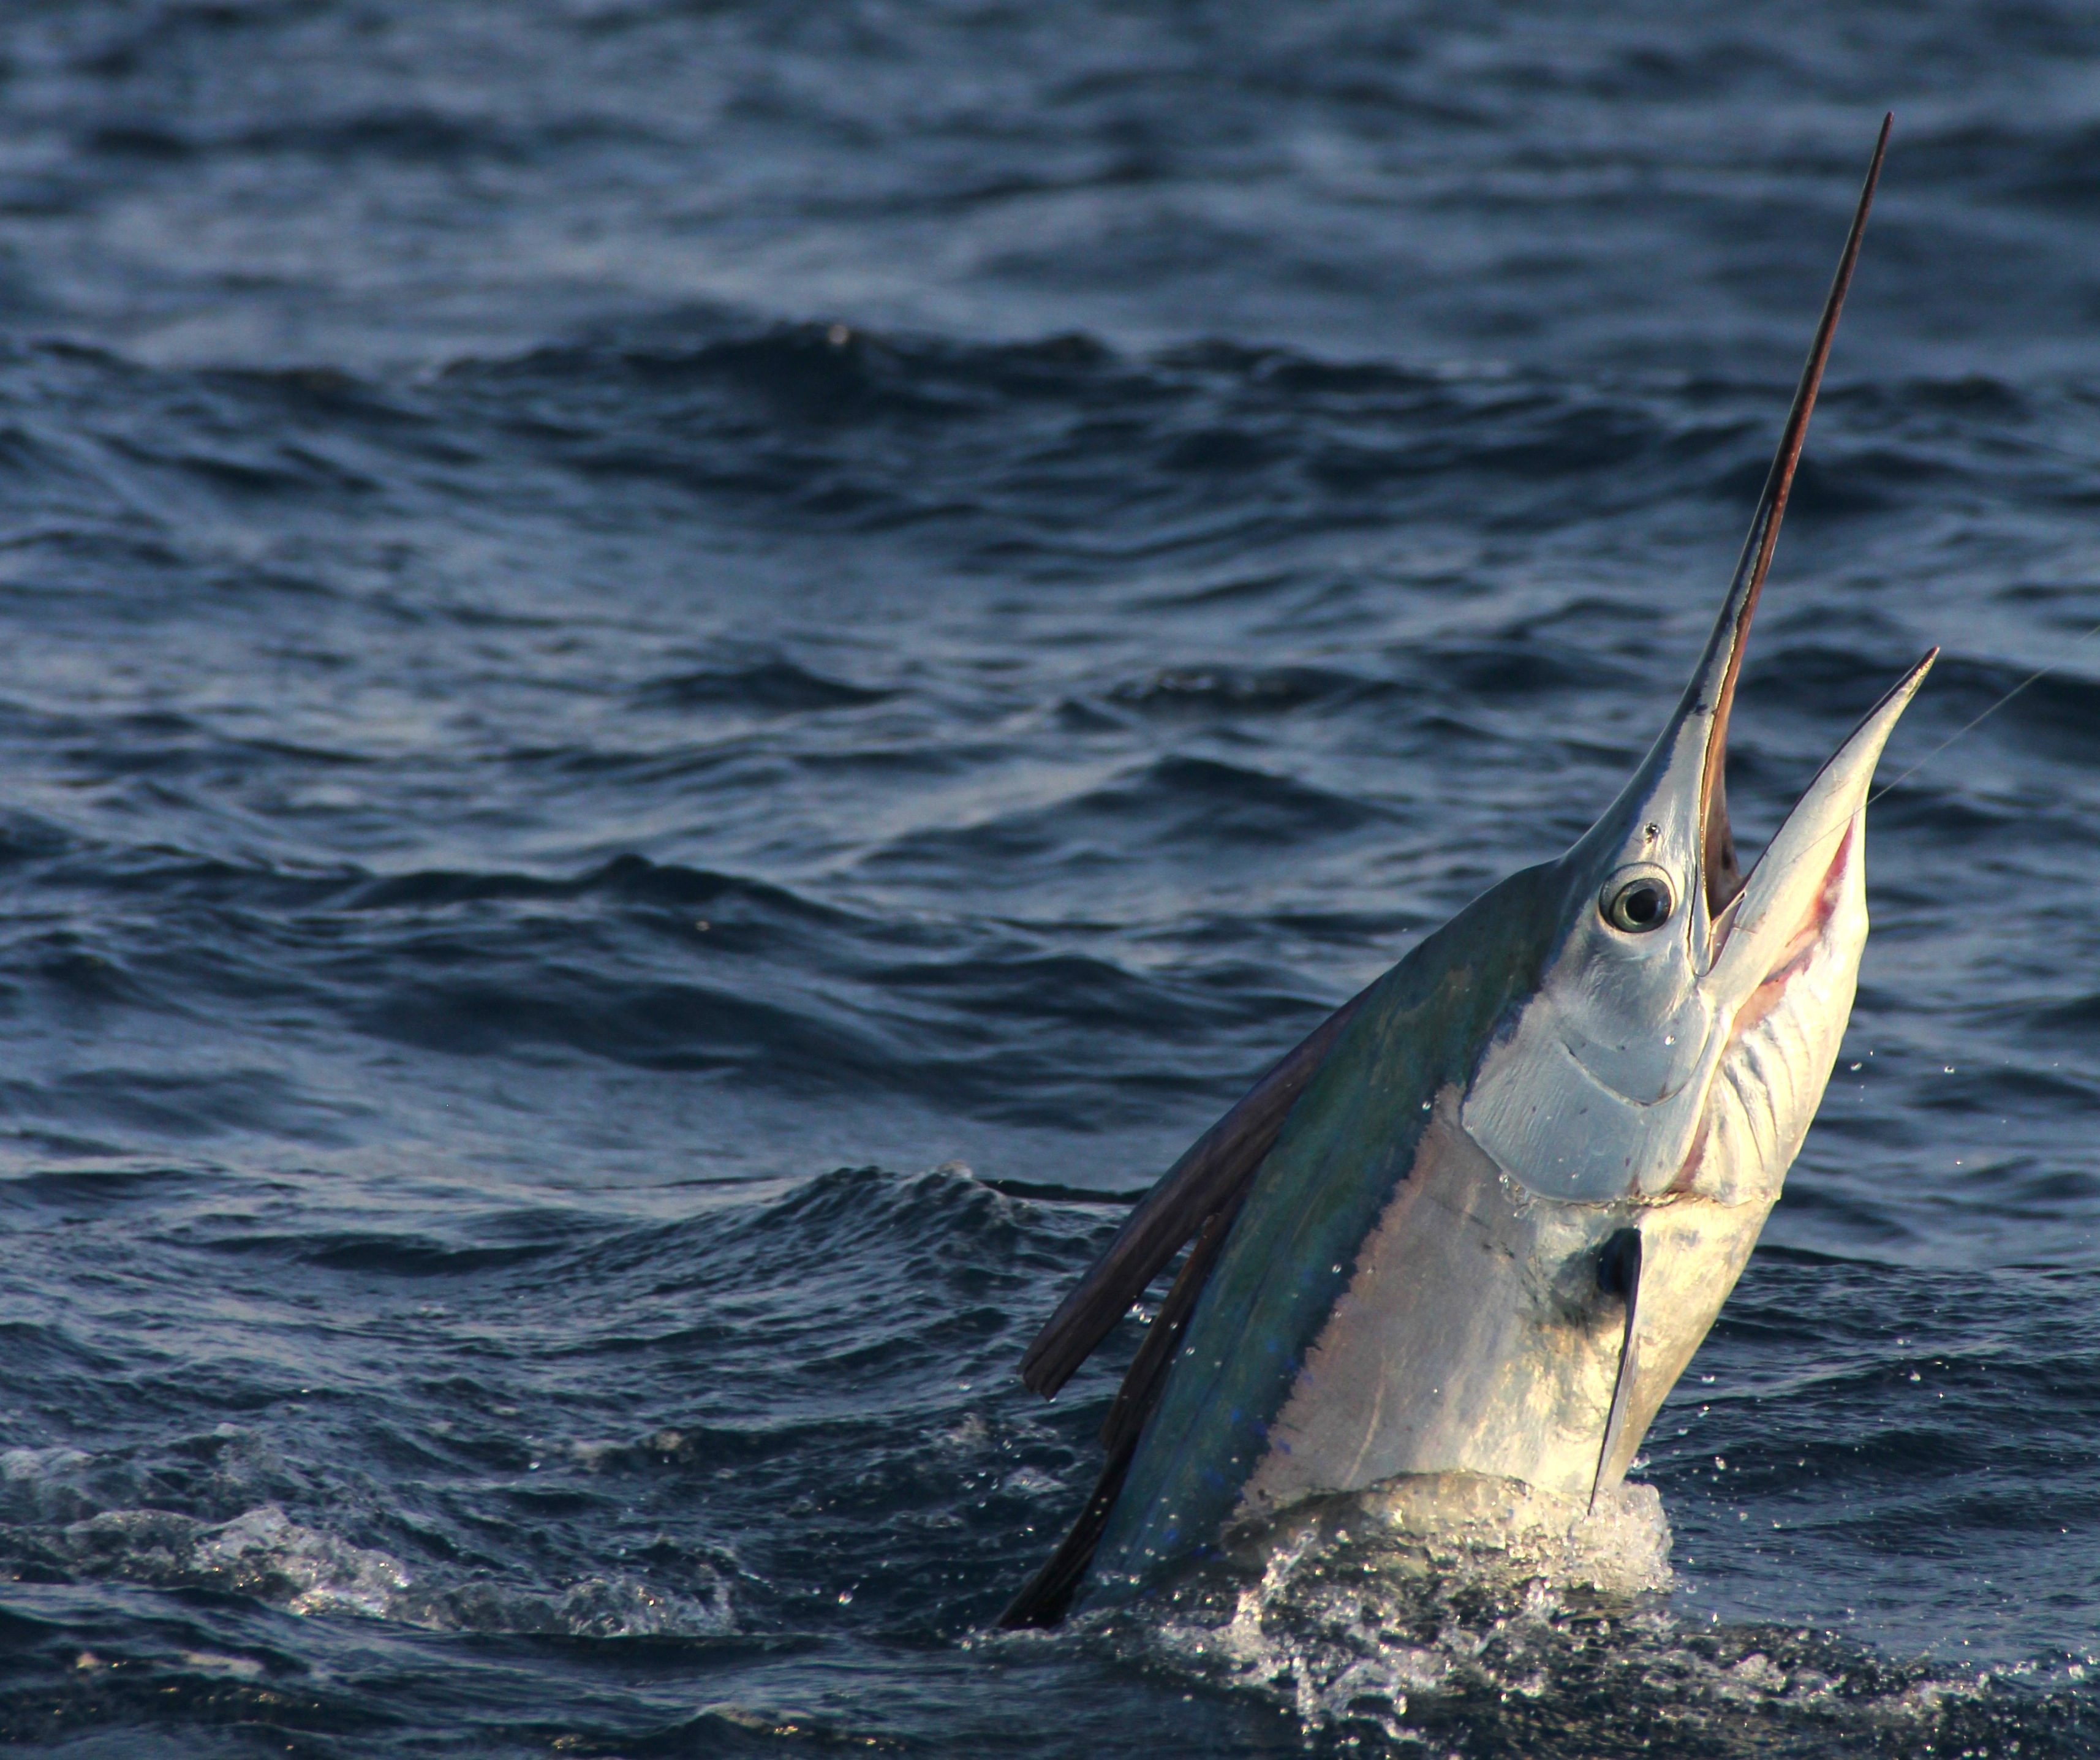 Your Guide to Fishing for Marlin, Sailfish and other Florida Billfish